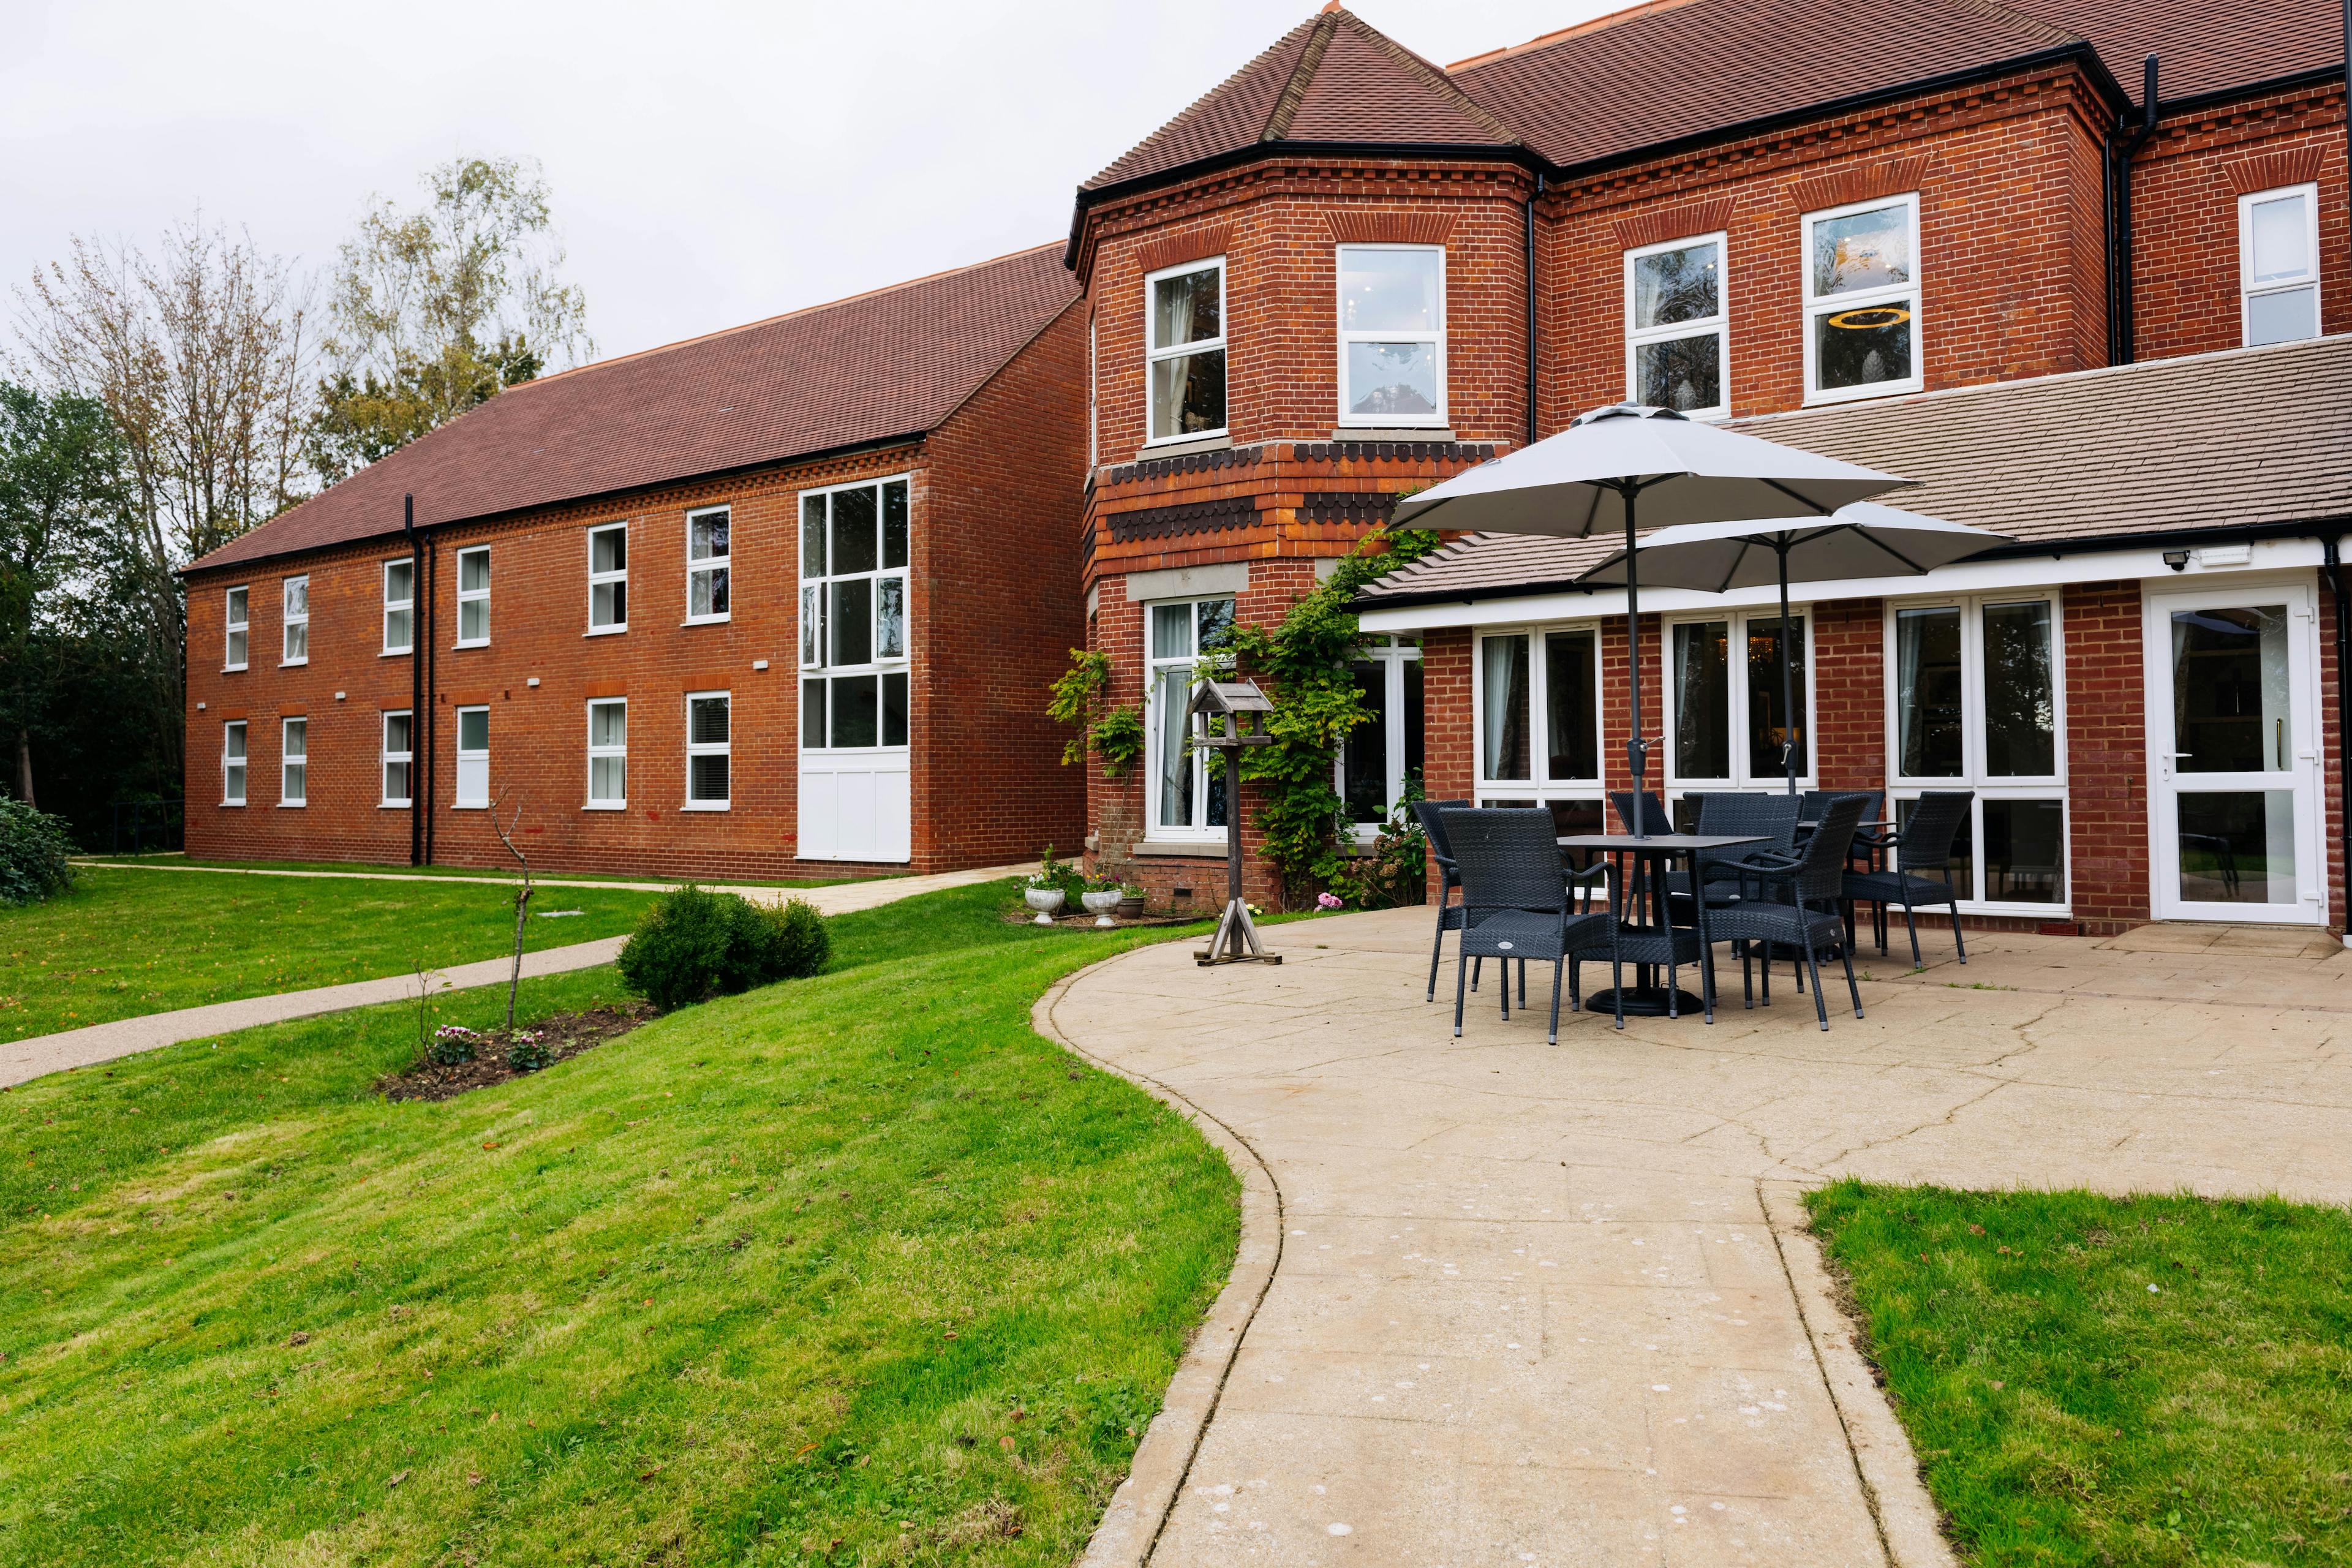 Garden at Lydfords Care Home in Lewes, East Sussex